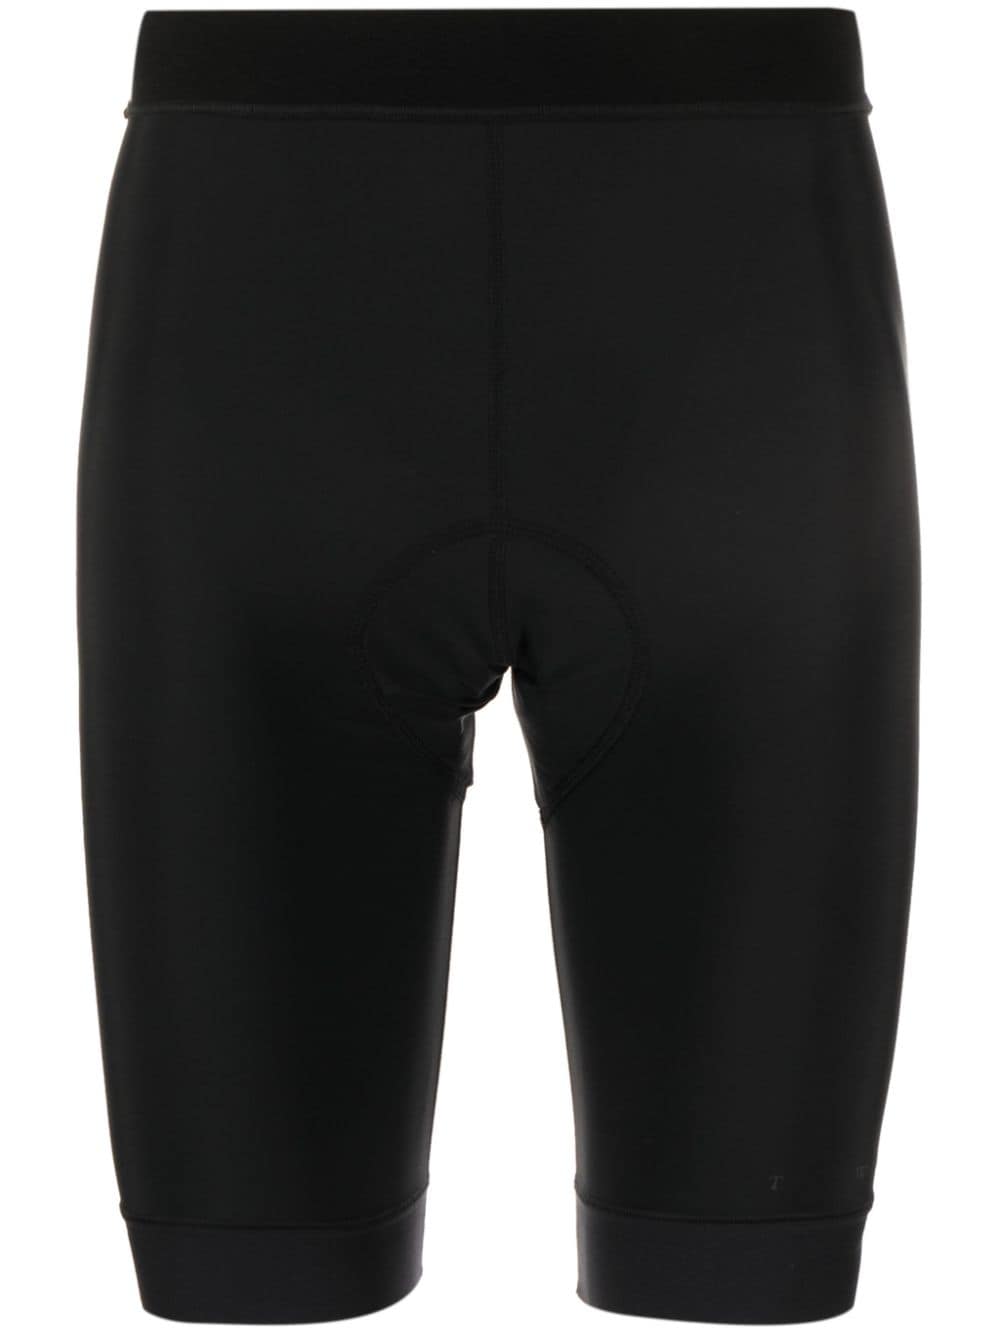 There Was One padded cycling shorts - Black von There Was One